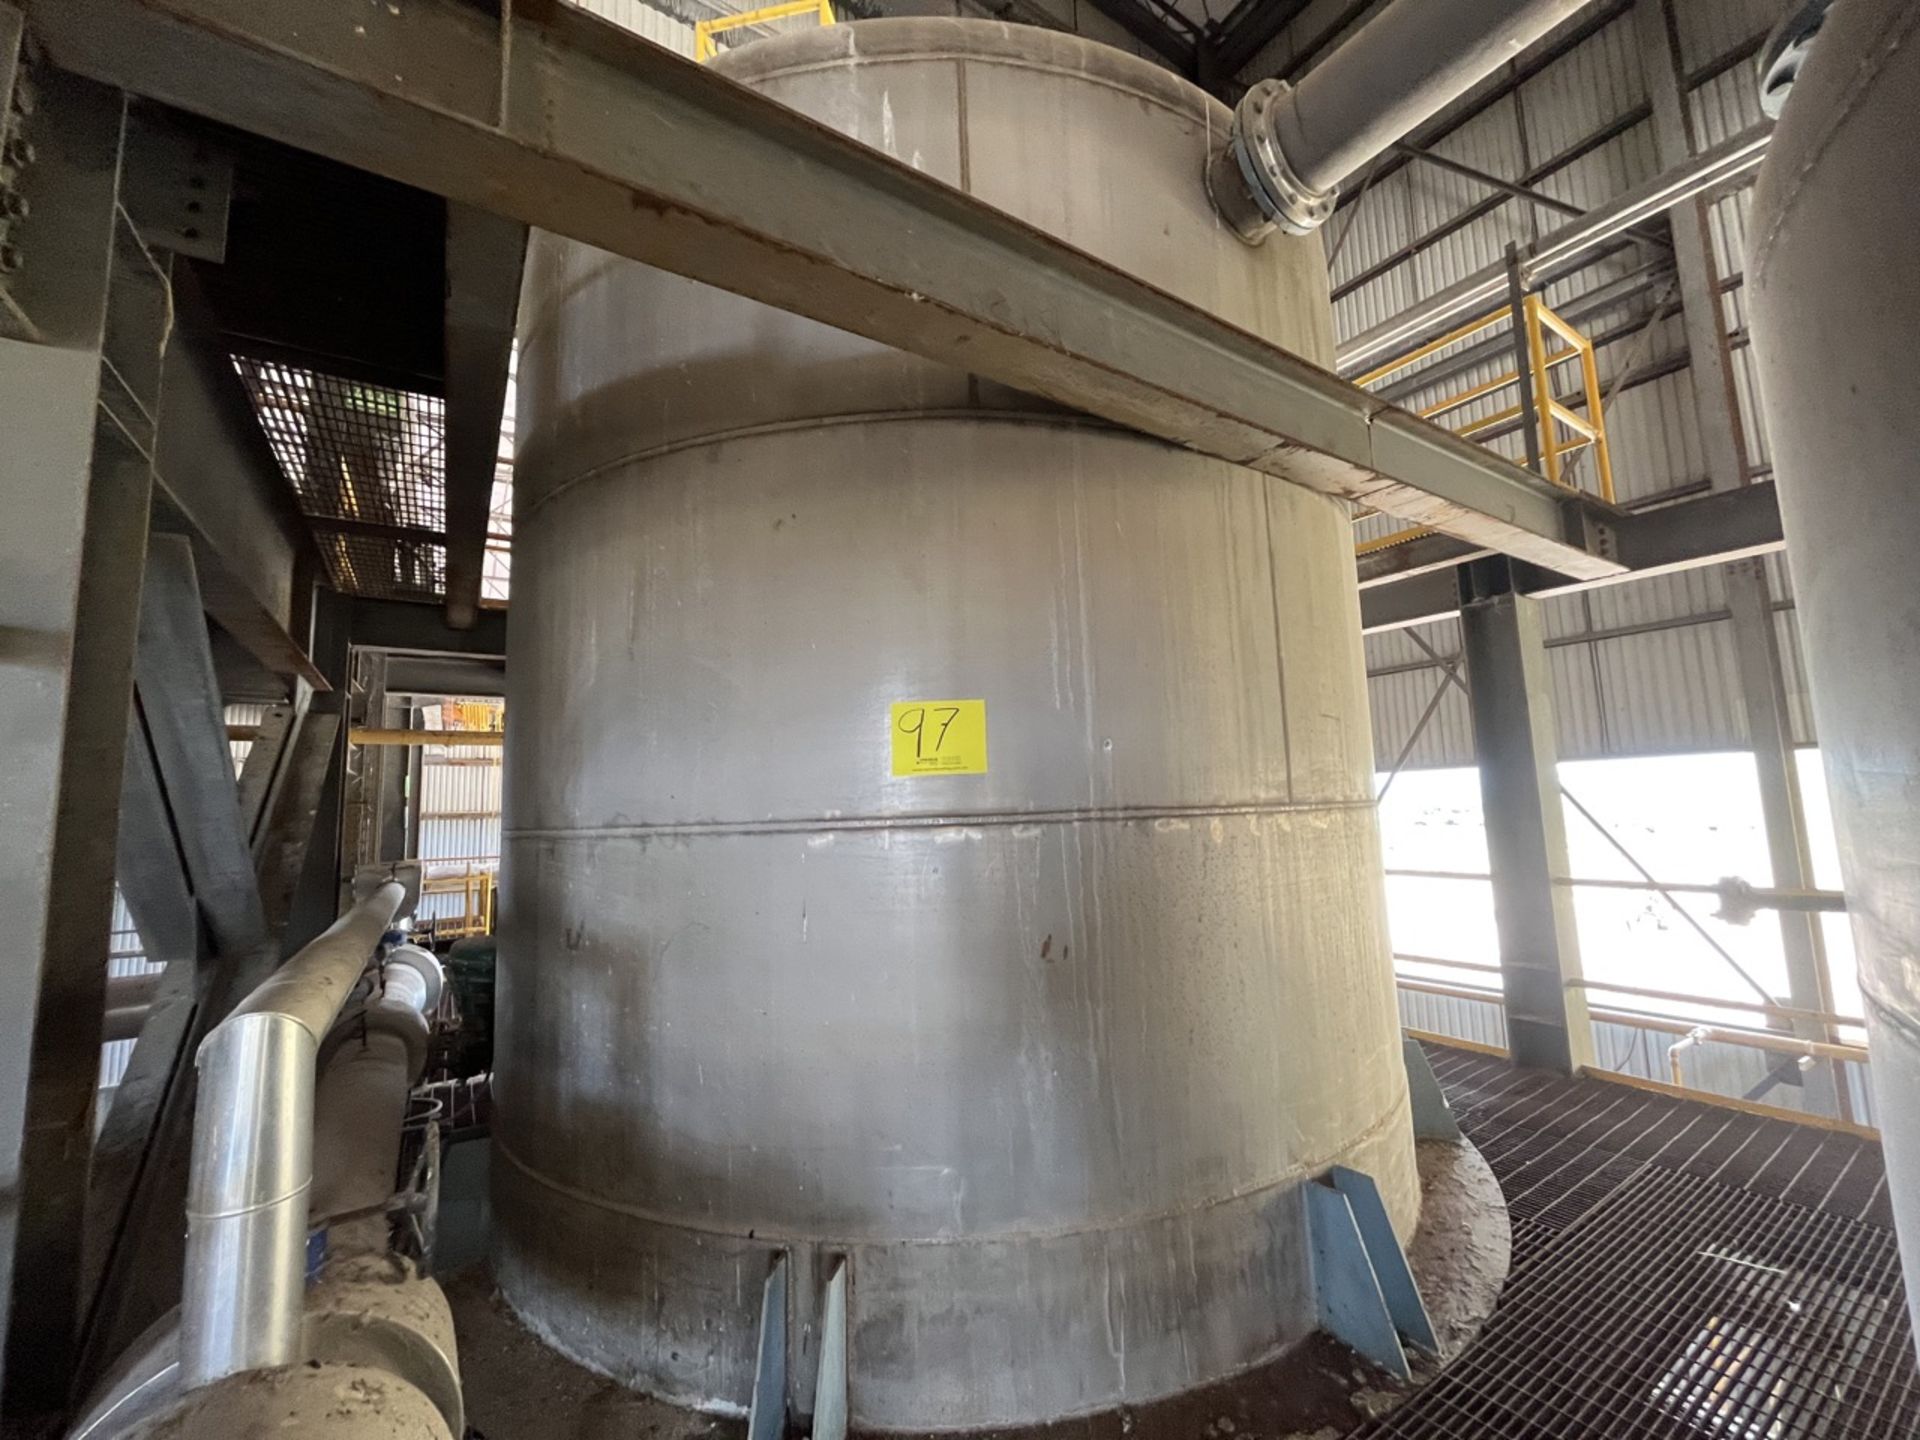 Conical storage tank with stainless steel toriesferica lid measures approximately 4.30 meters in di